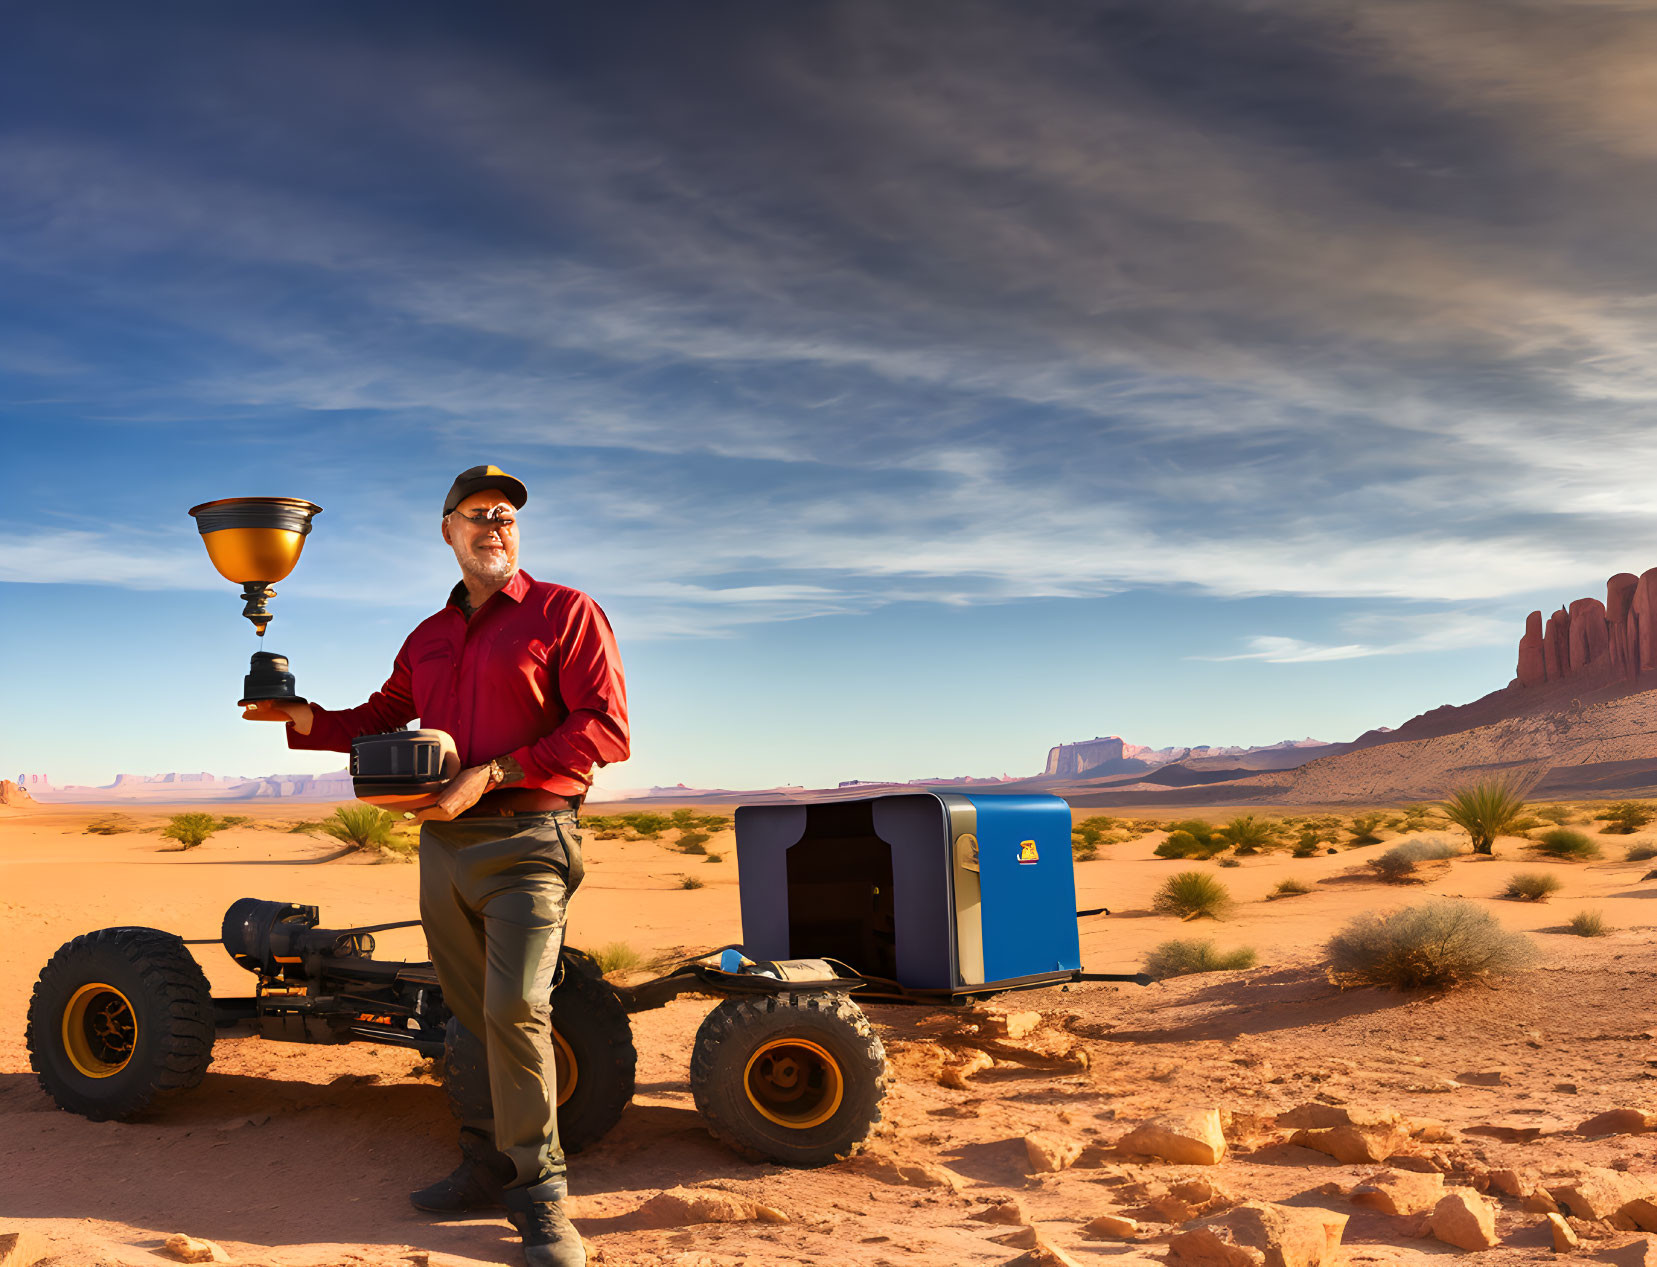 Man smiling in desert with trophy and blue cooler on off-road cart